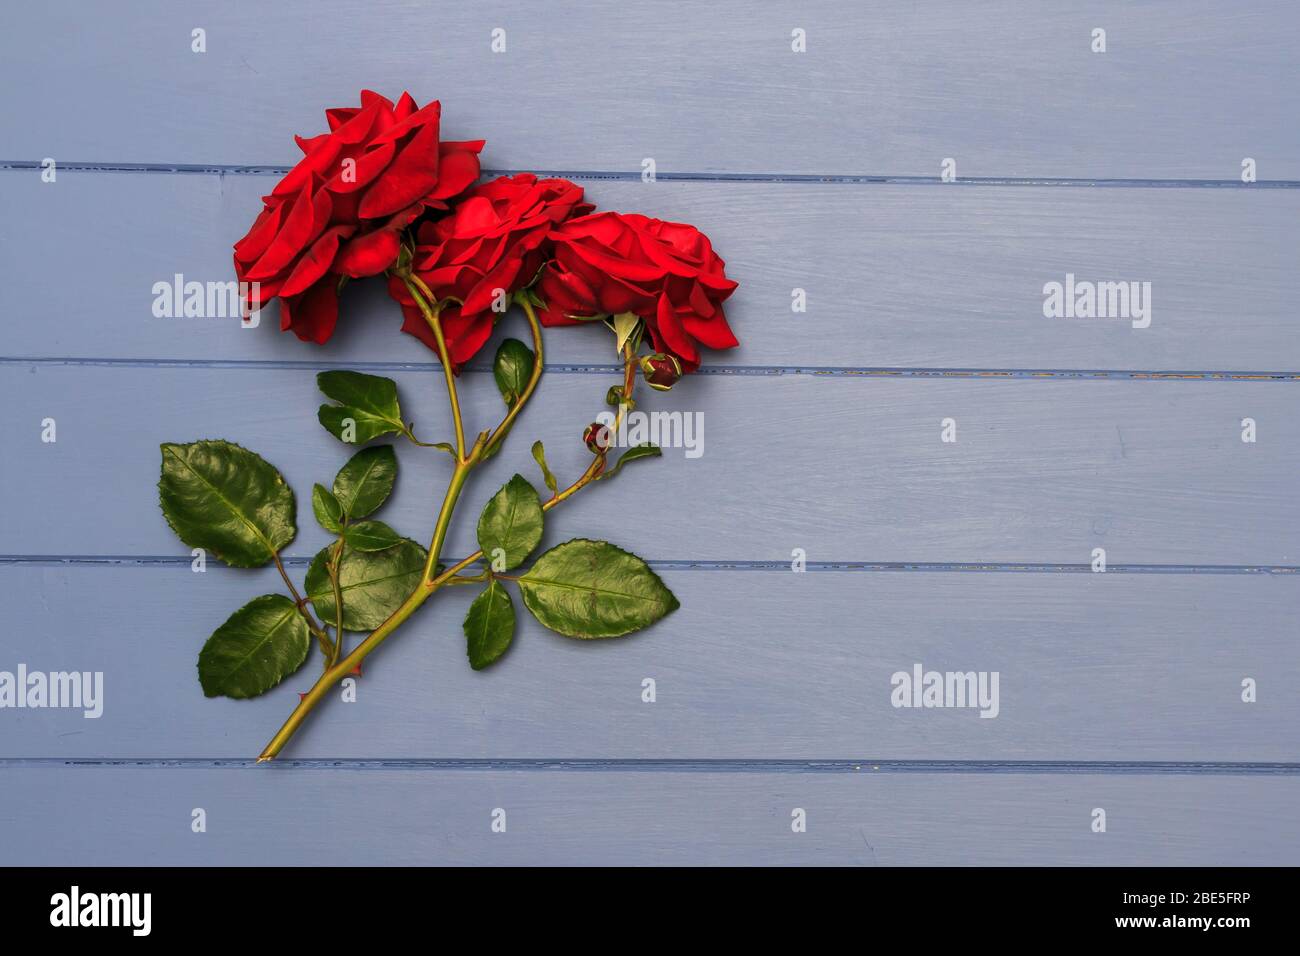 Cut spray of three Red Roses on blue wooden boards Stock Photo